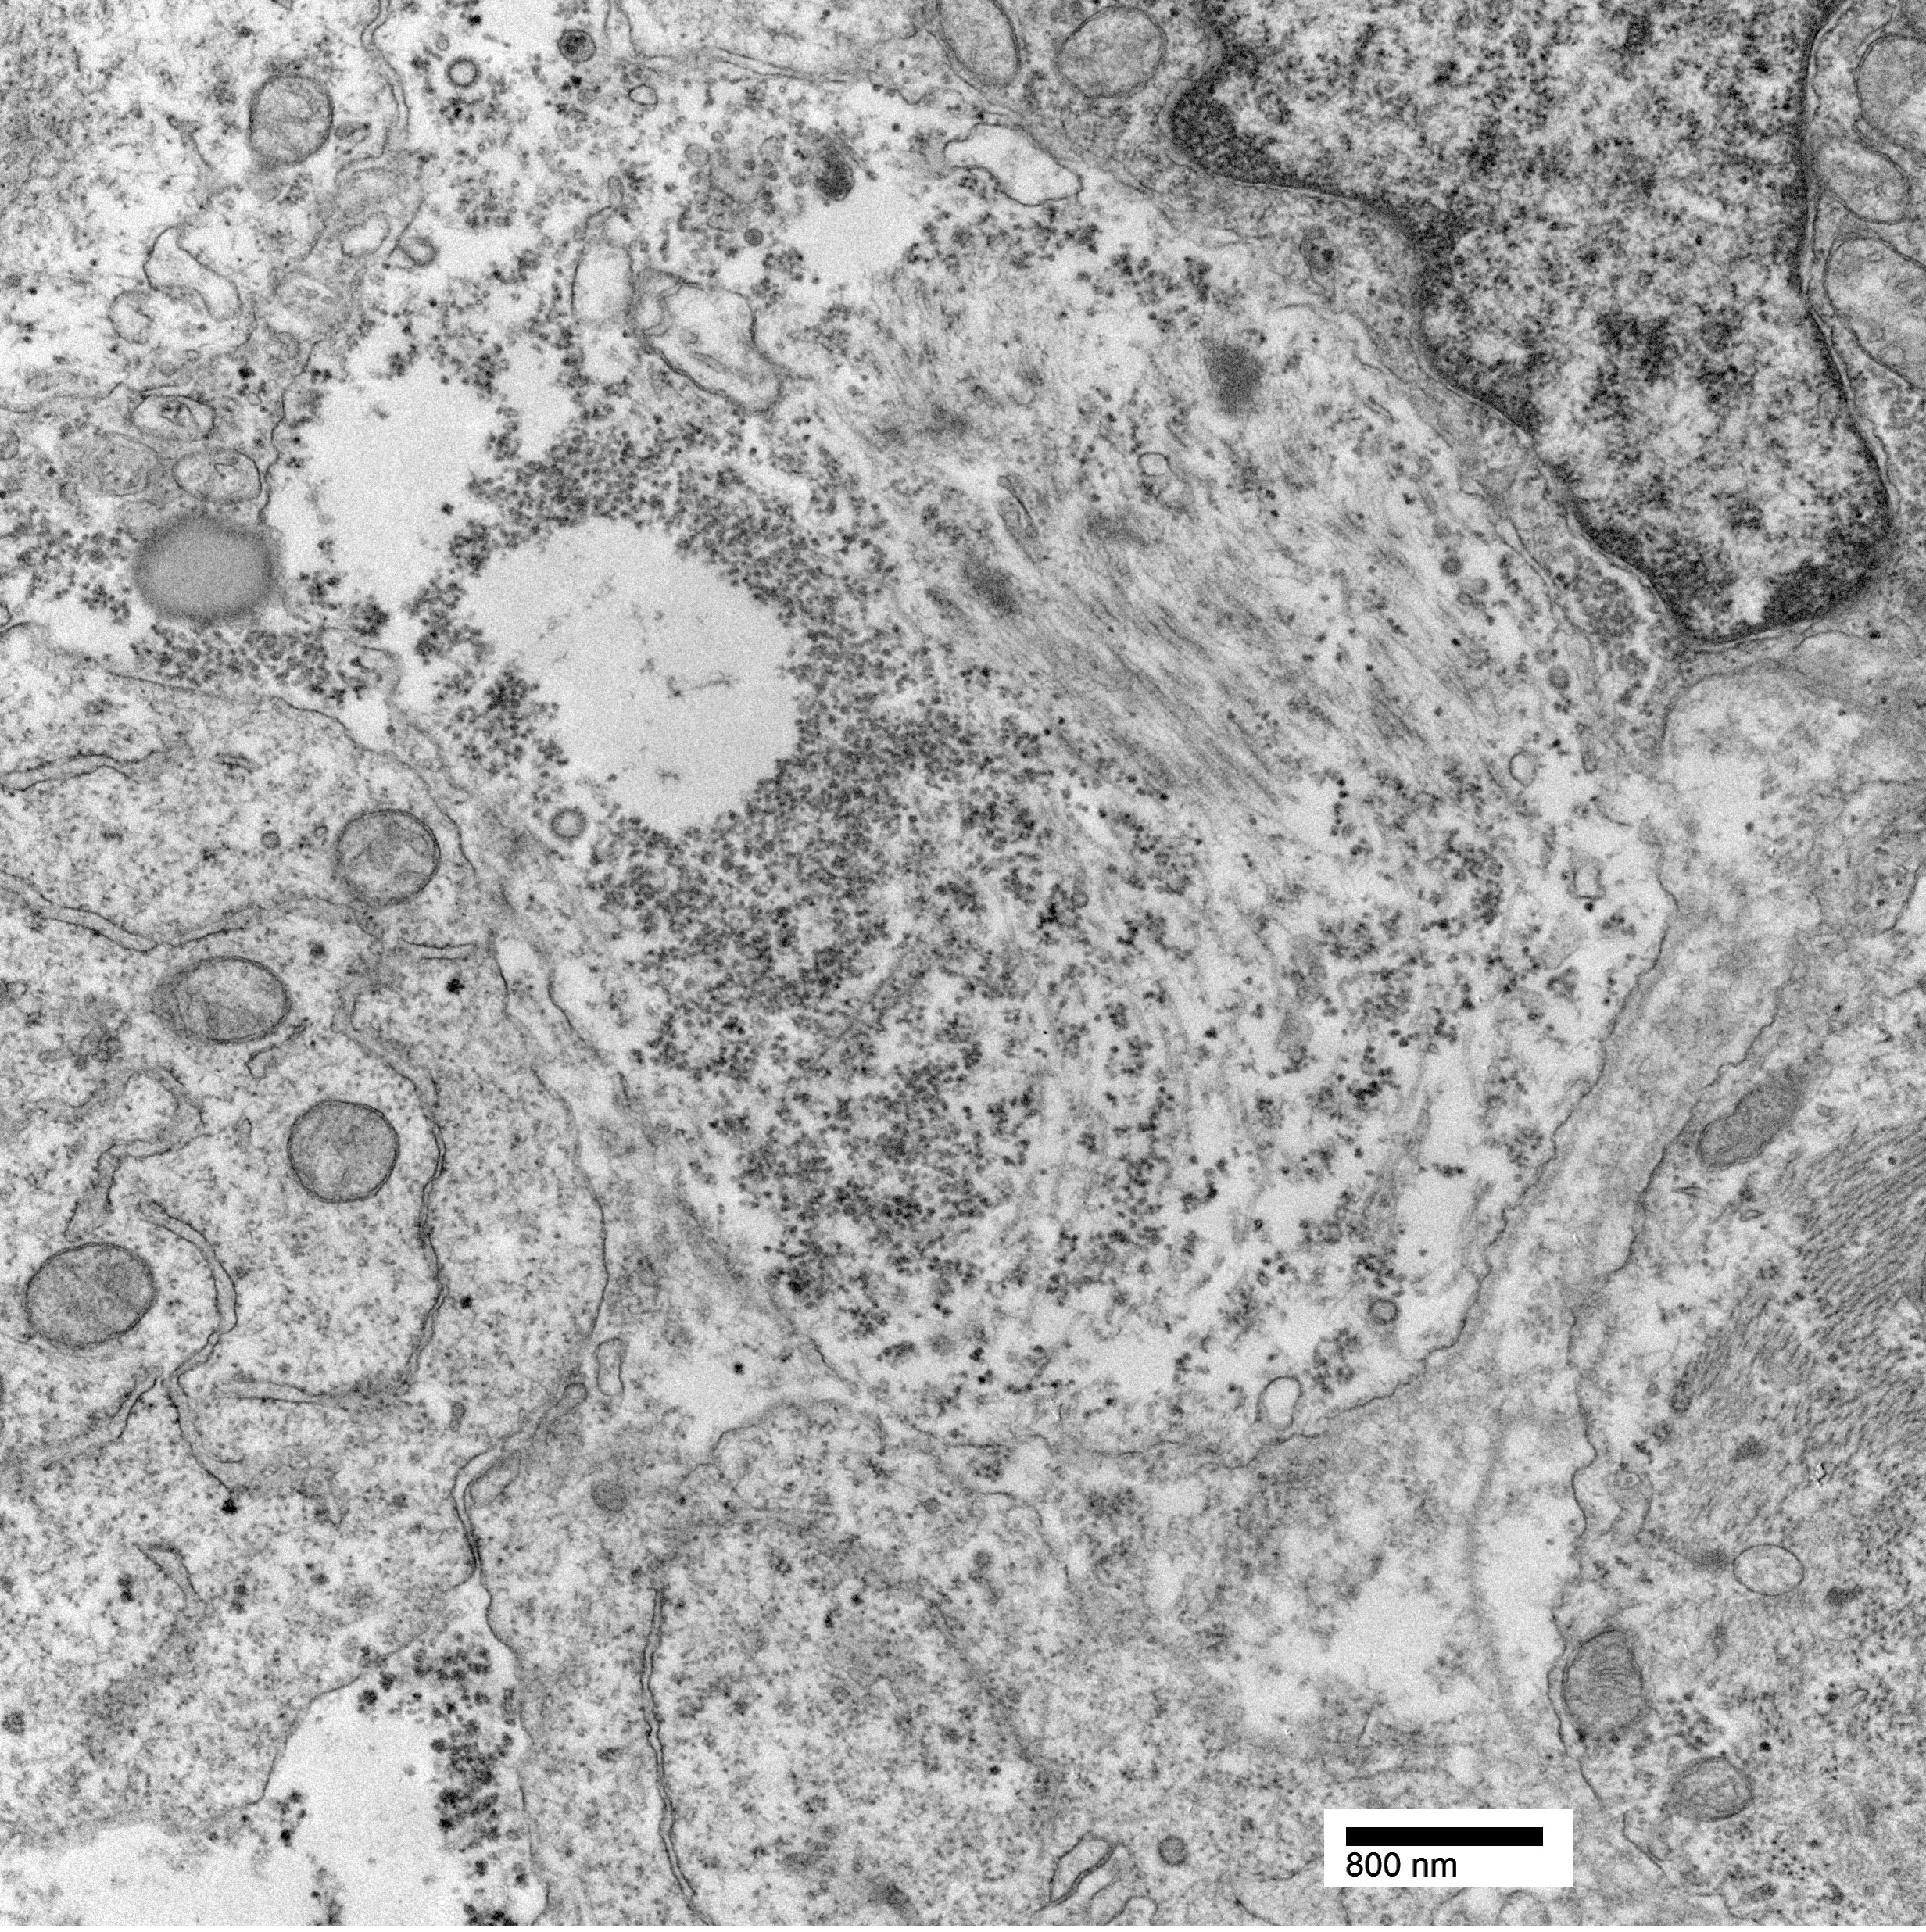 This electron microscopy image depicts one of the available tumors from the CSTN. In this image, a cell nucleus in the upper right corner of a sample of rhabdomyosarcoma has characteristic glycogen accumulation. Filaments are forming early z-bands (center), and lipid, basement membrane and tight junctions are also visible.